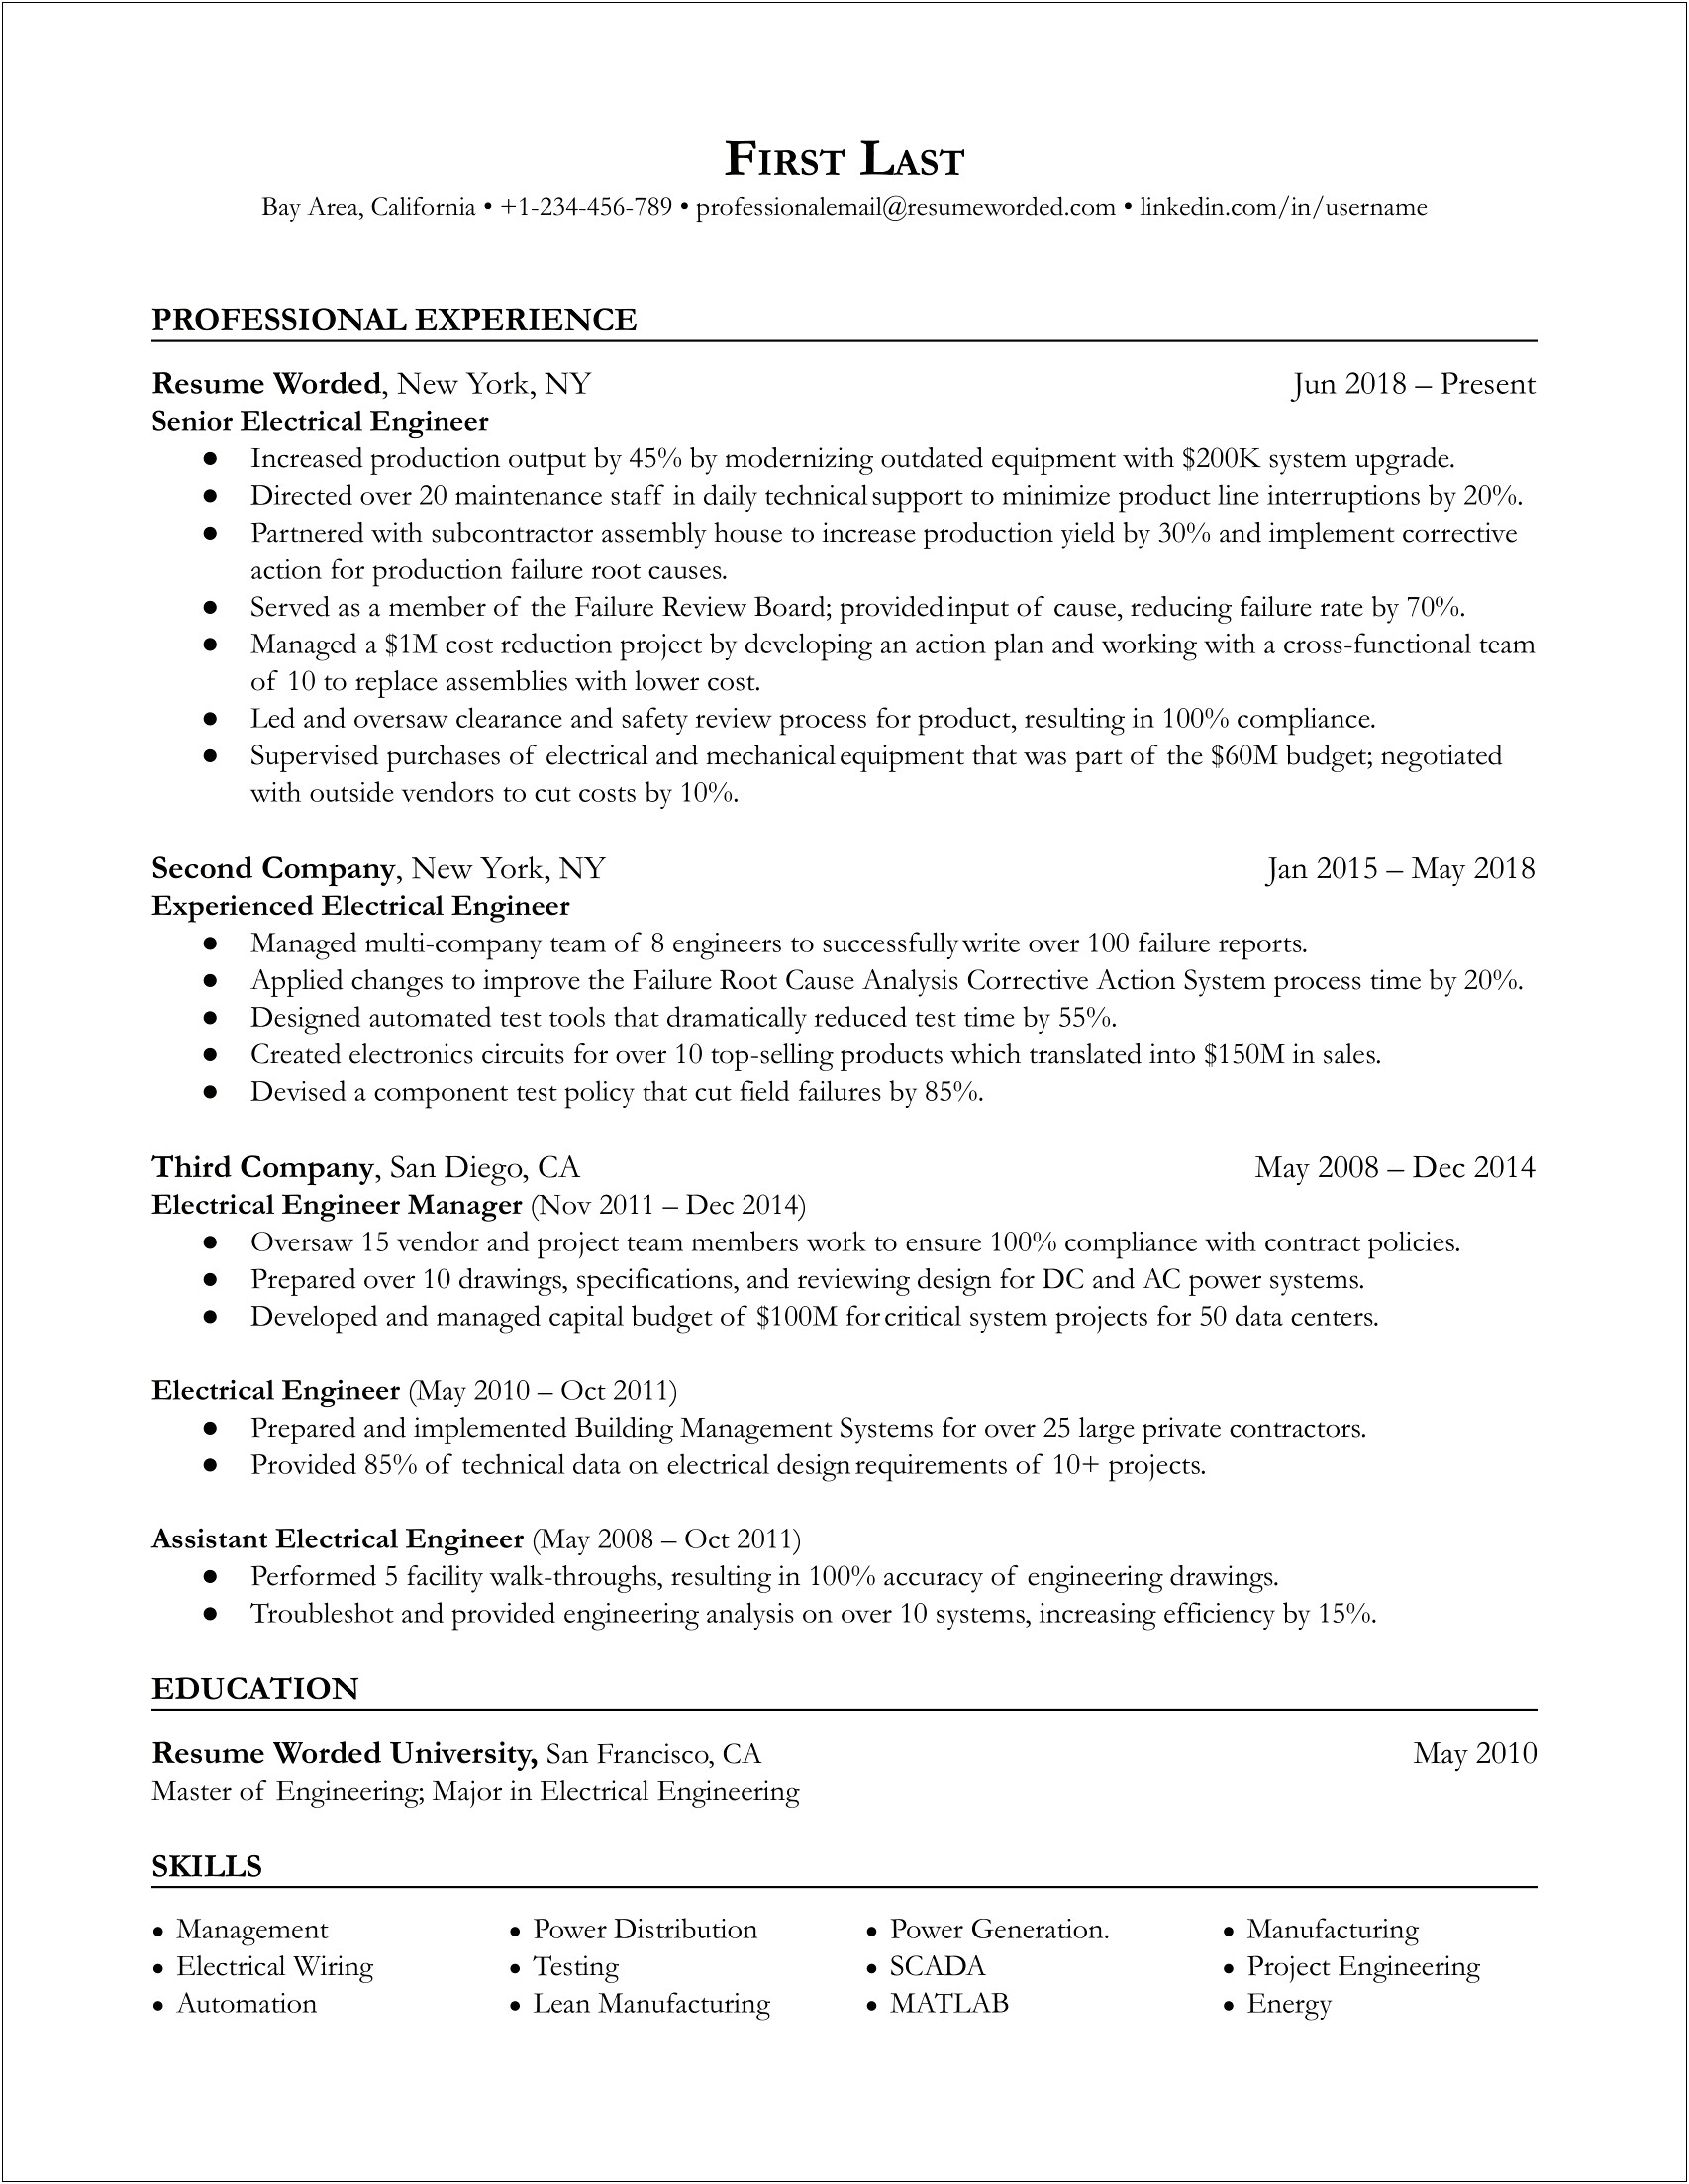 1 Year Experience Resume Format For Design Engineer